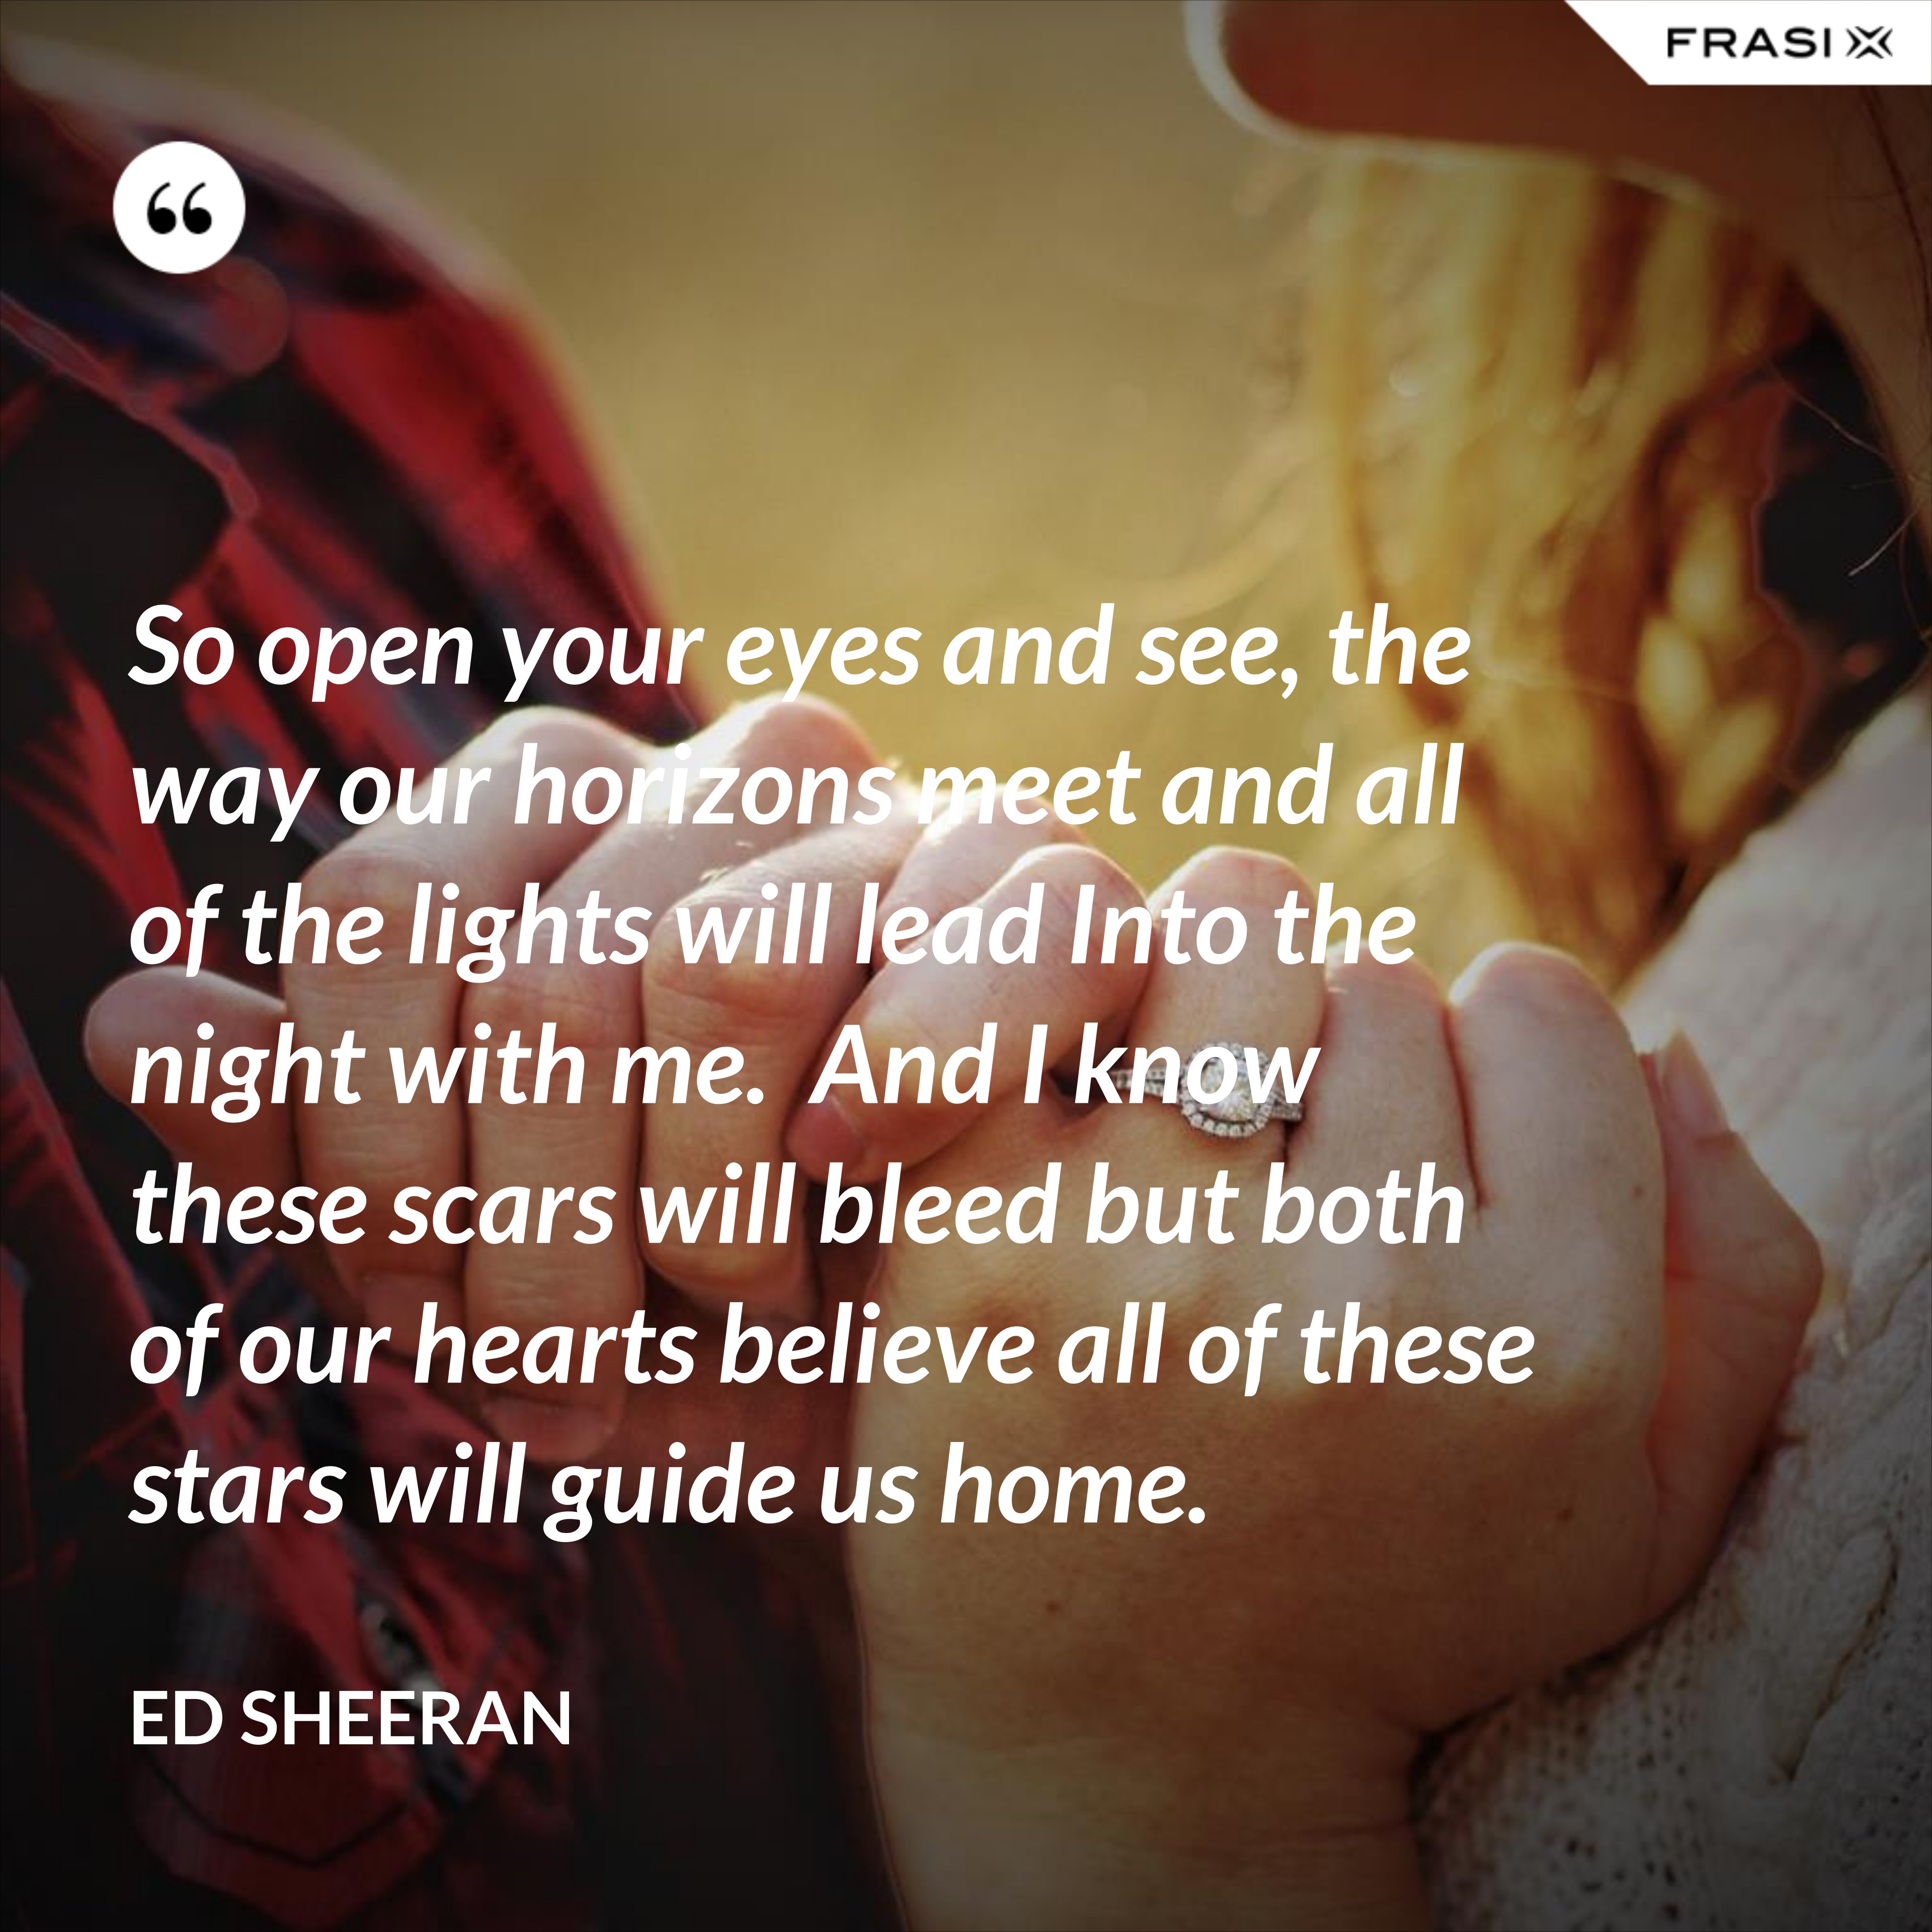 So open your eyes and see, the way our horizons meet and all of the lights will lead Into the night with me.  And I know these scars will bleed but both of our hearts believe all of these stars will guide us home. - Ed Sheeran